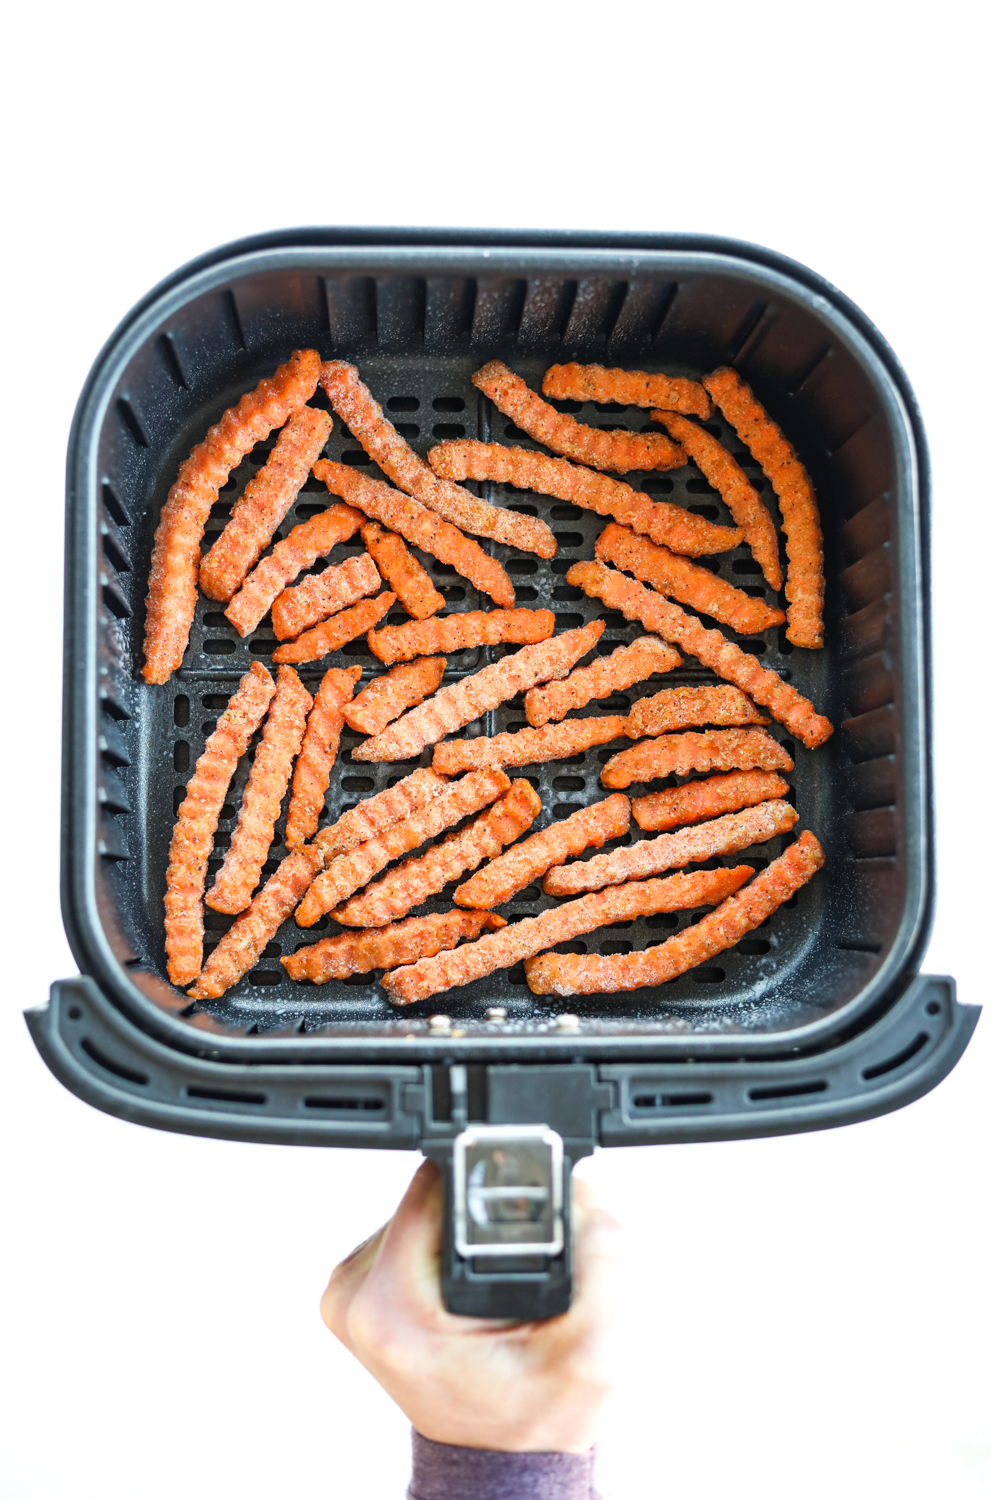 A hand holding an air fryer with a bunch of frozen sweet potato fries in the air fryer basket.